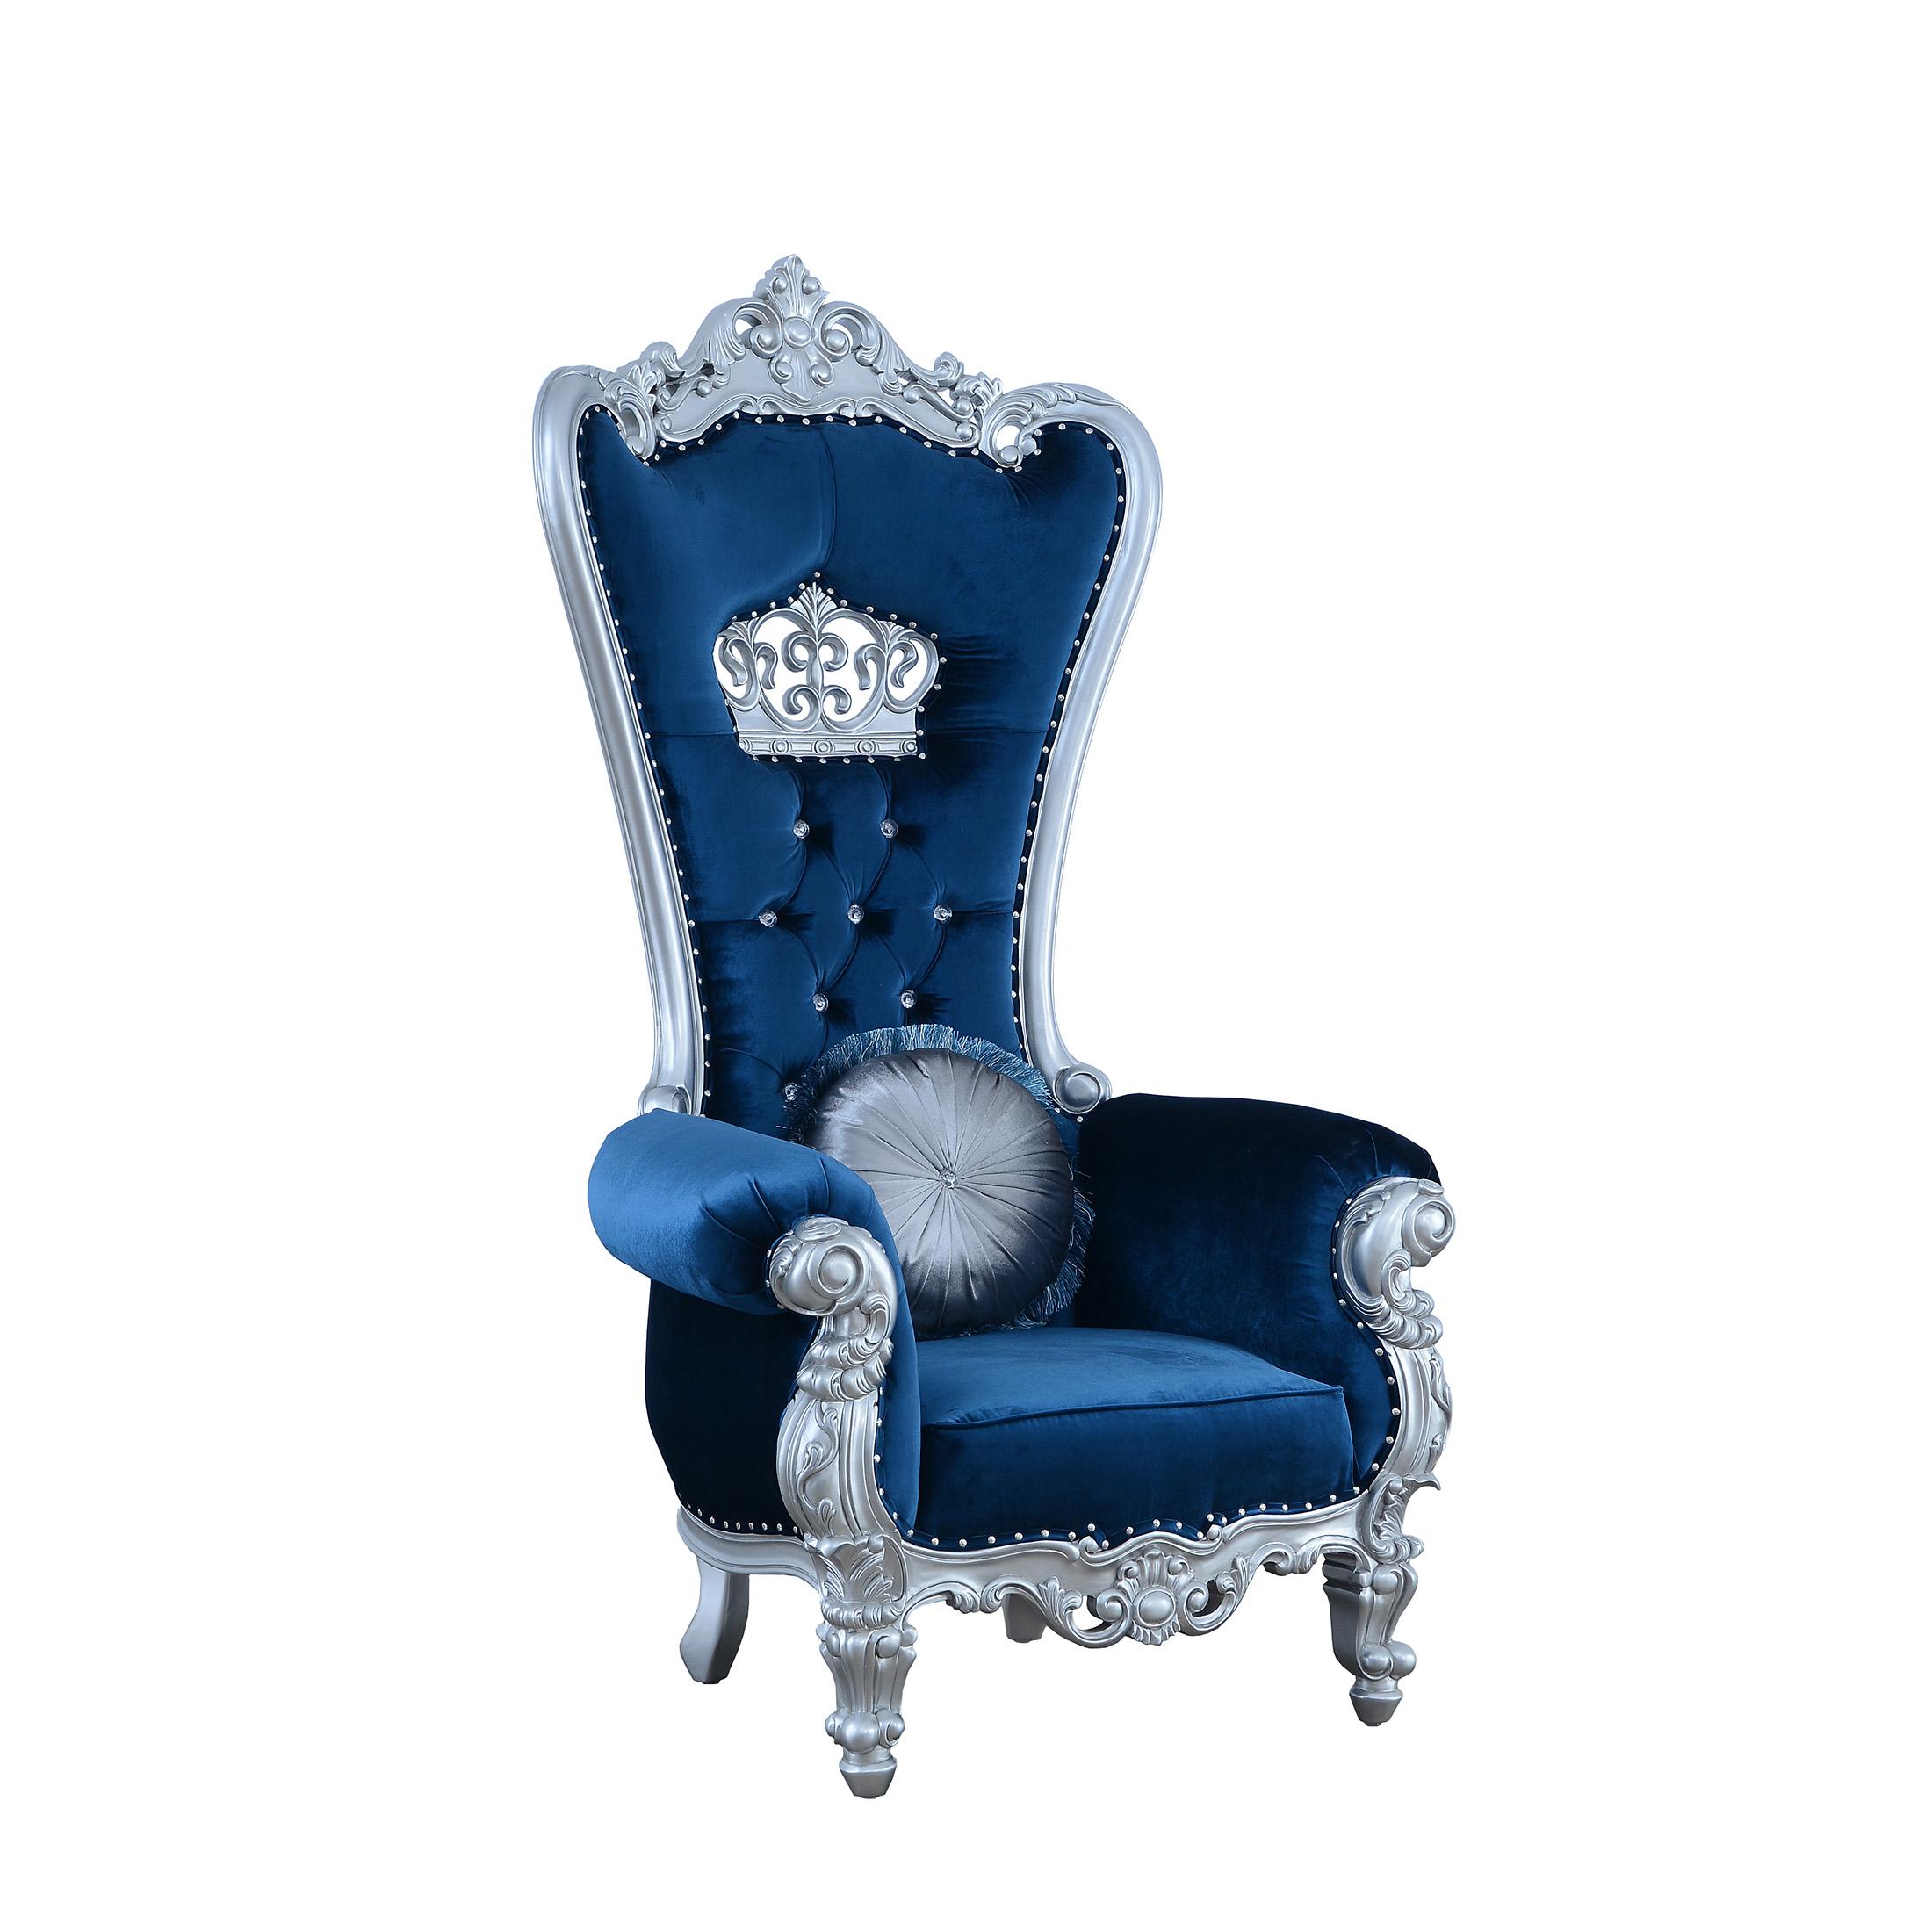 Classic, Traditional Arm Chair QUEEN ELIZABETH 35096 in Silver, Blue Fabric